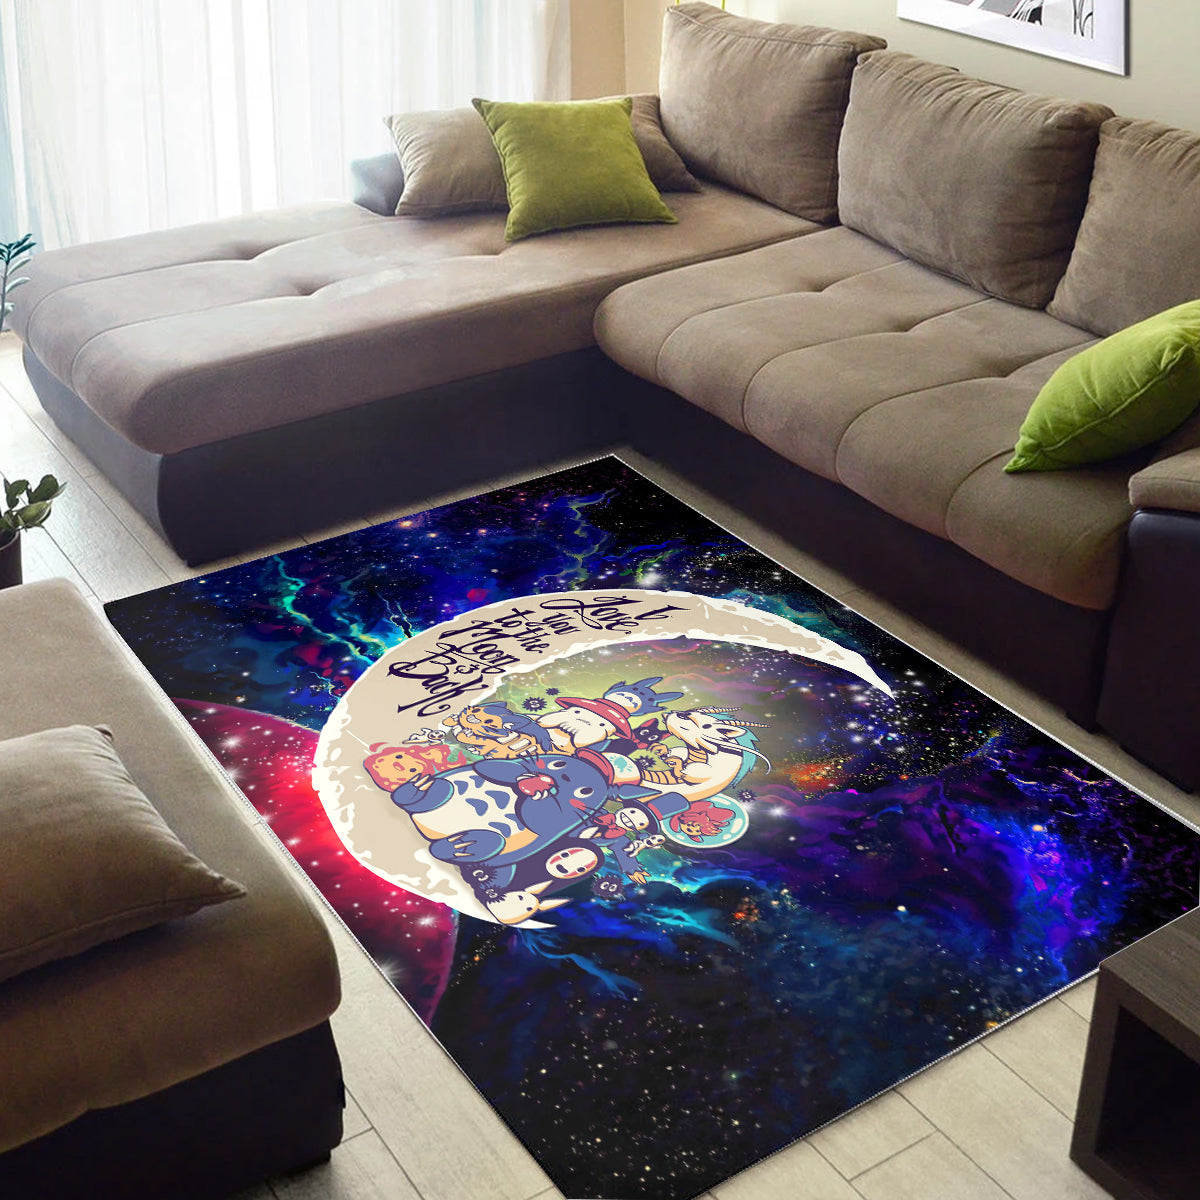 Ghibli Character Love You To The Moon Galaxy Carpet Rug Home Room Decor